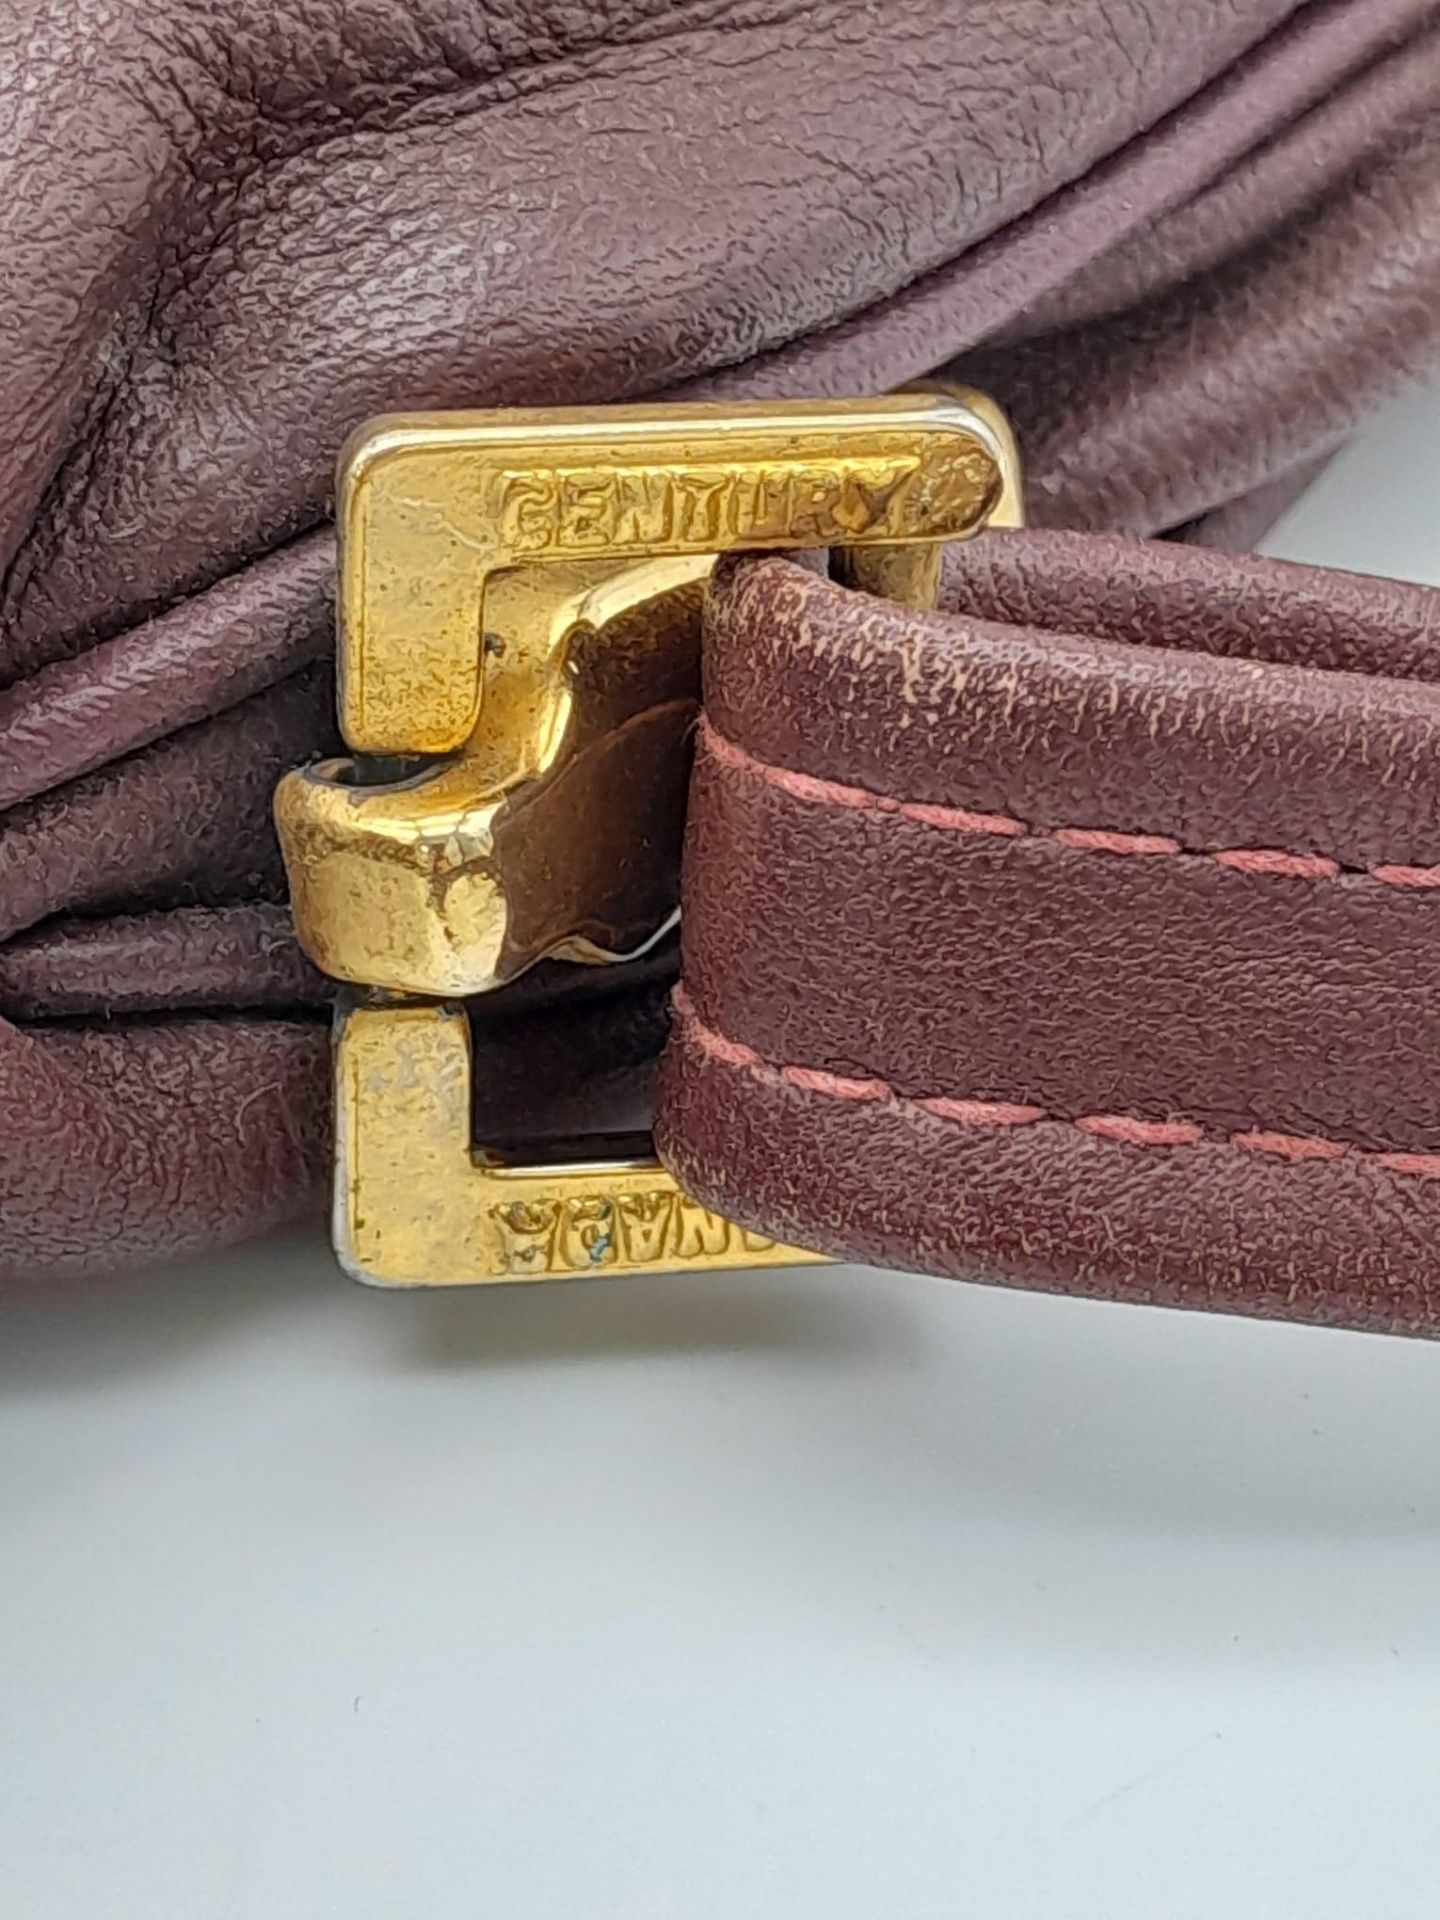 A Vintage Burgundy Leather Handbag. Burgundy leather with large exterior pocket. Gilded touches. - Image 8 of 9